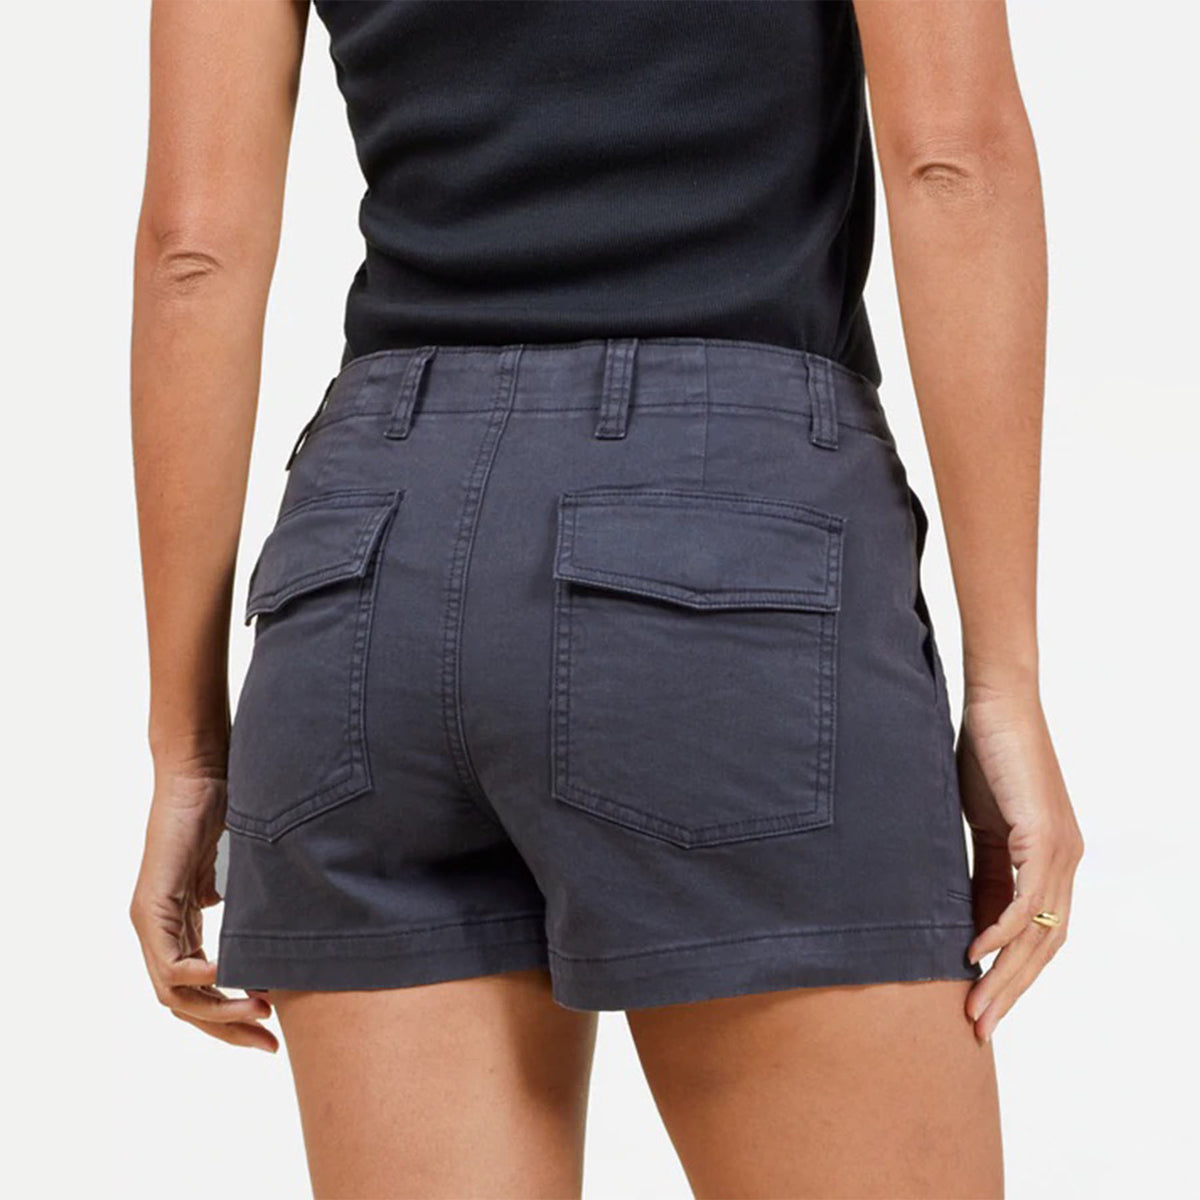 Hero image featuring the back of the Outerknown Women's Emory short in black